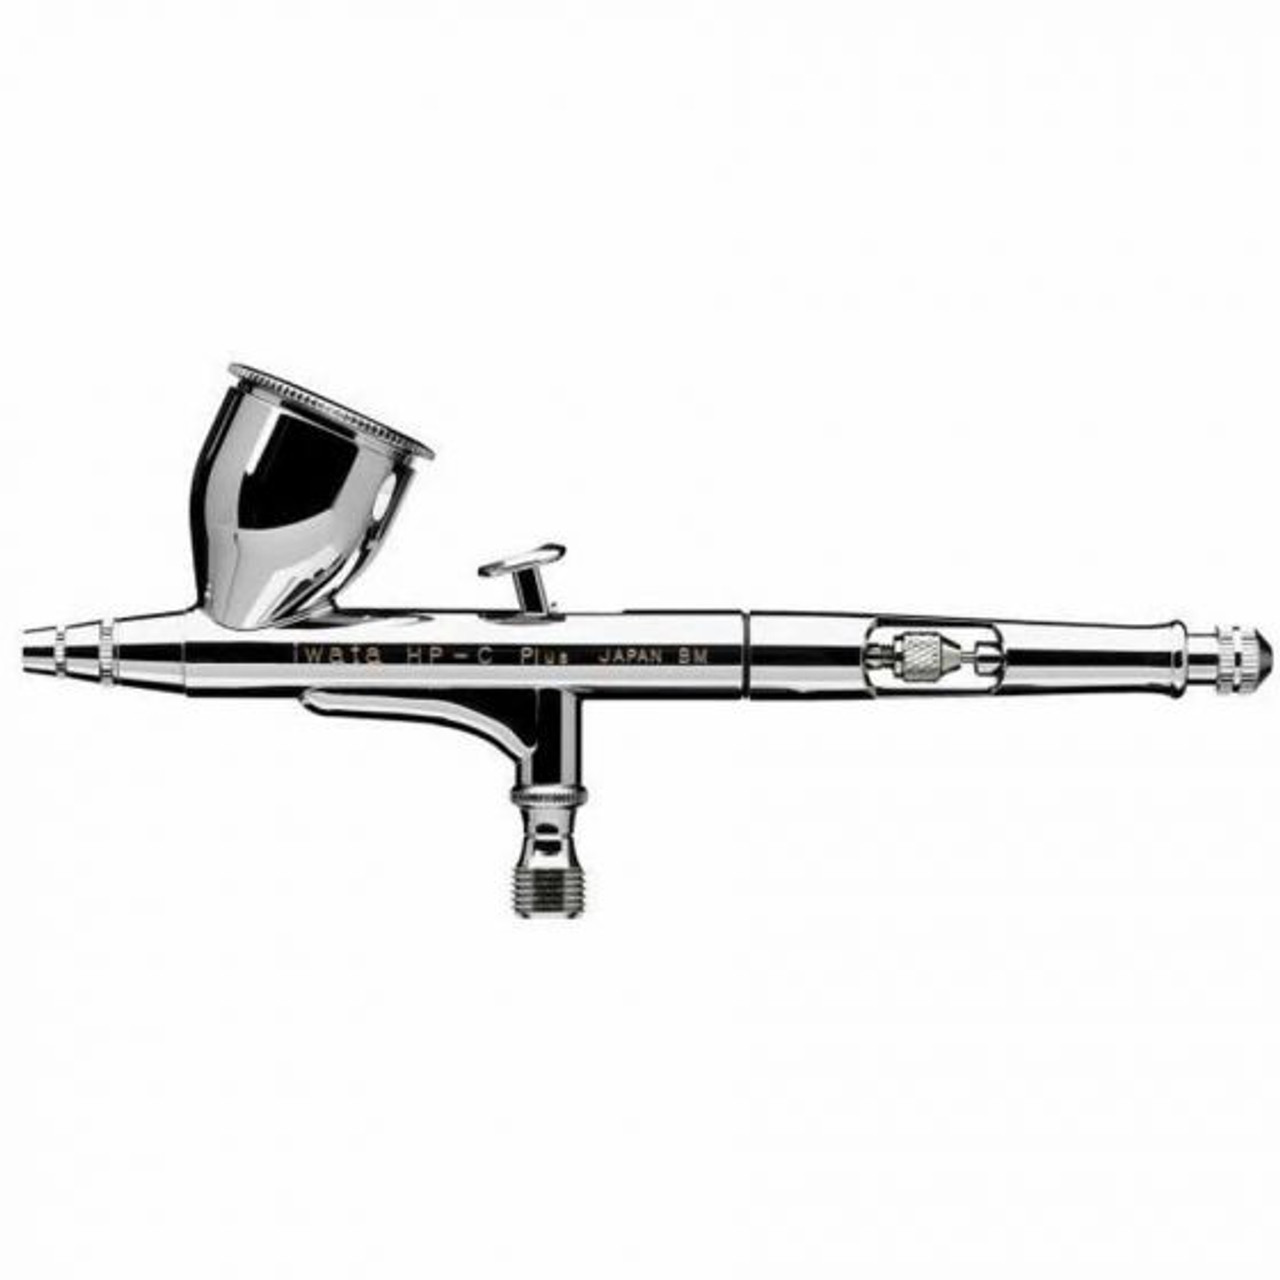 ANEST IWATA 4004 High Performance HP-C Plus Series Dual Action Gravity Feed Airbrush, 6.1 in OAL, Brass